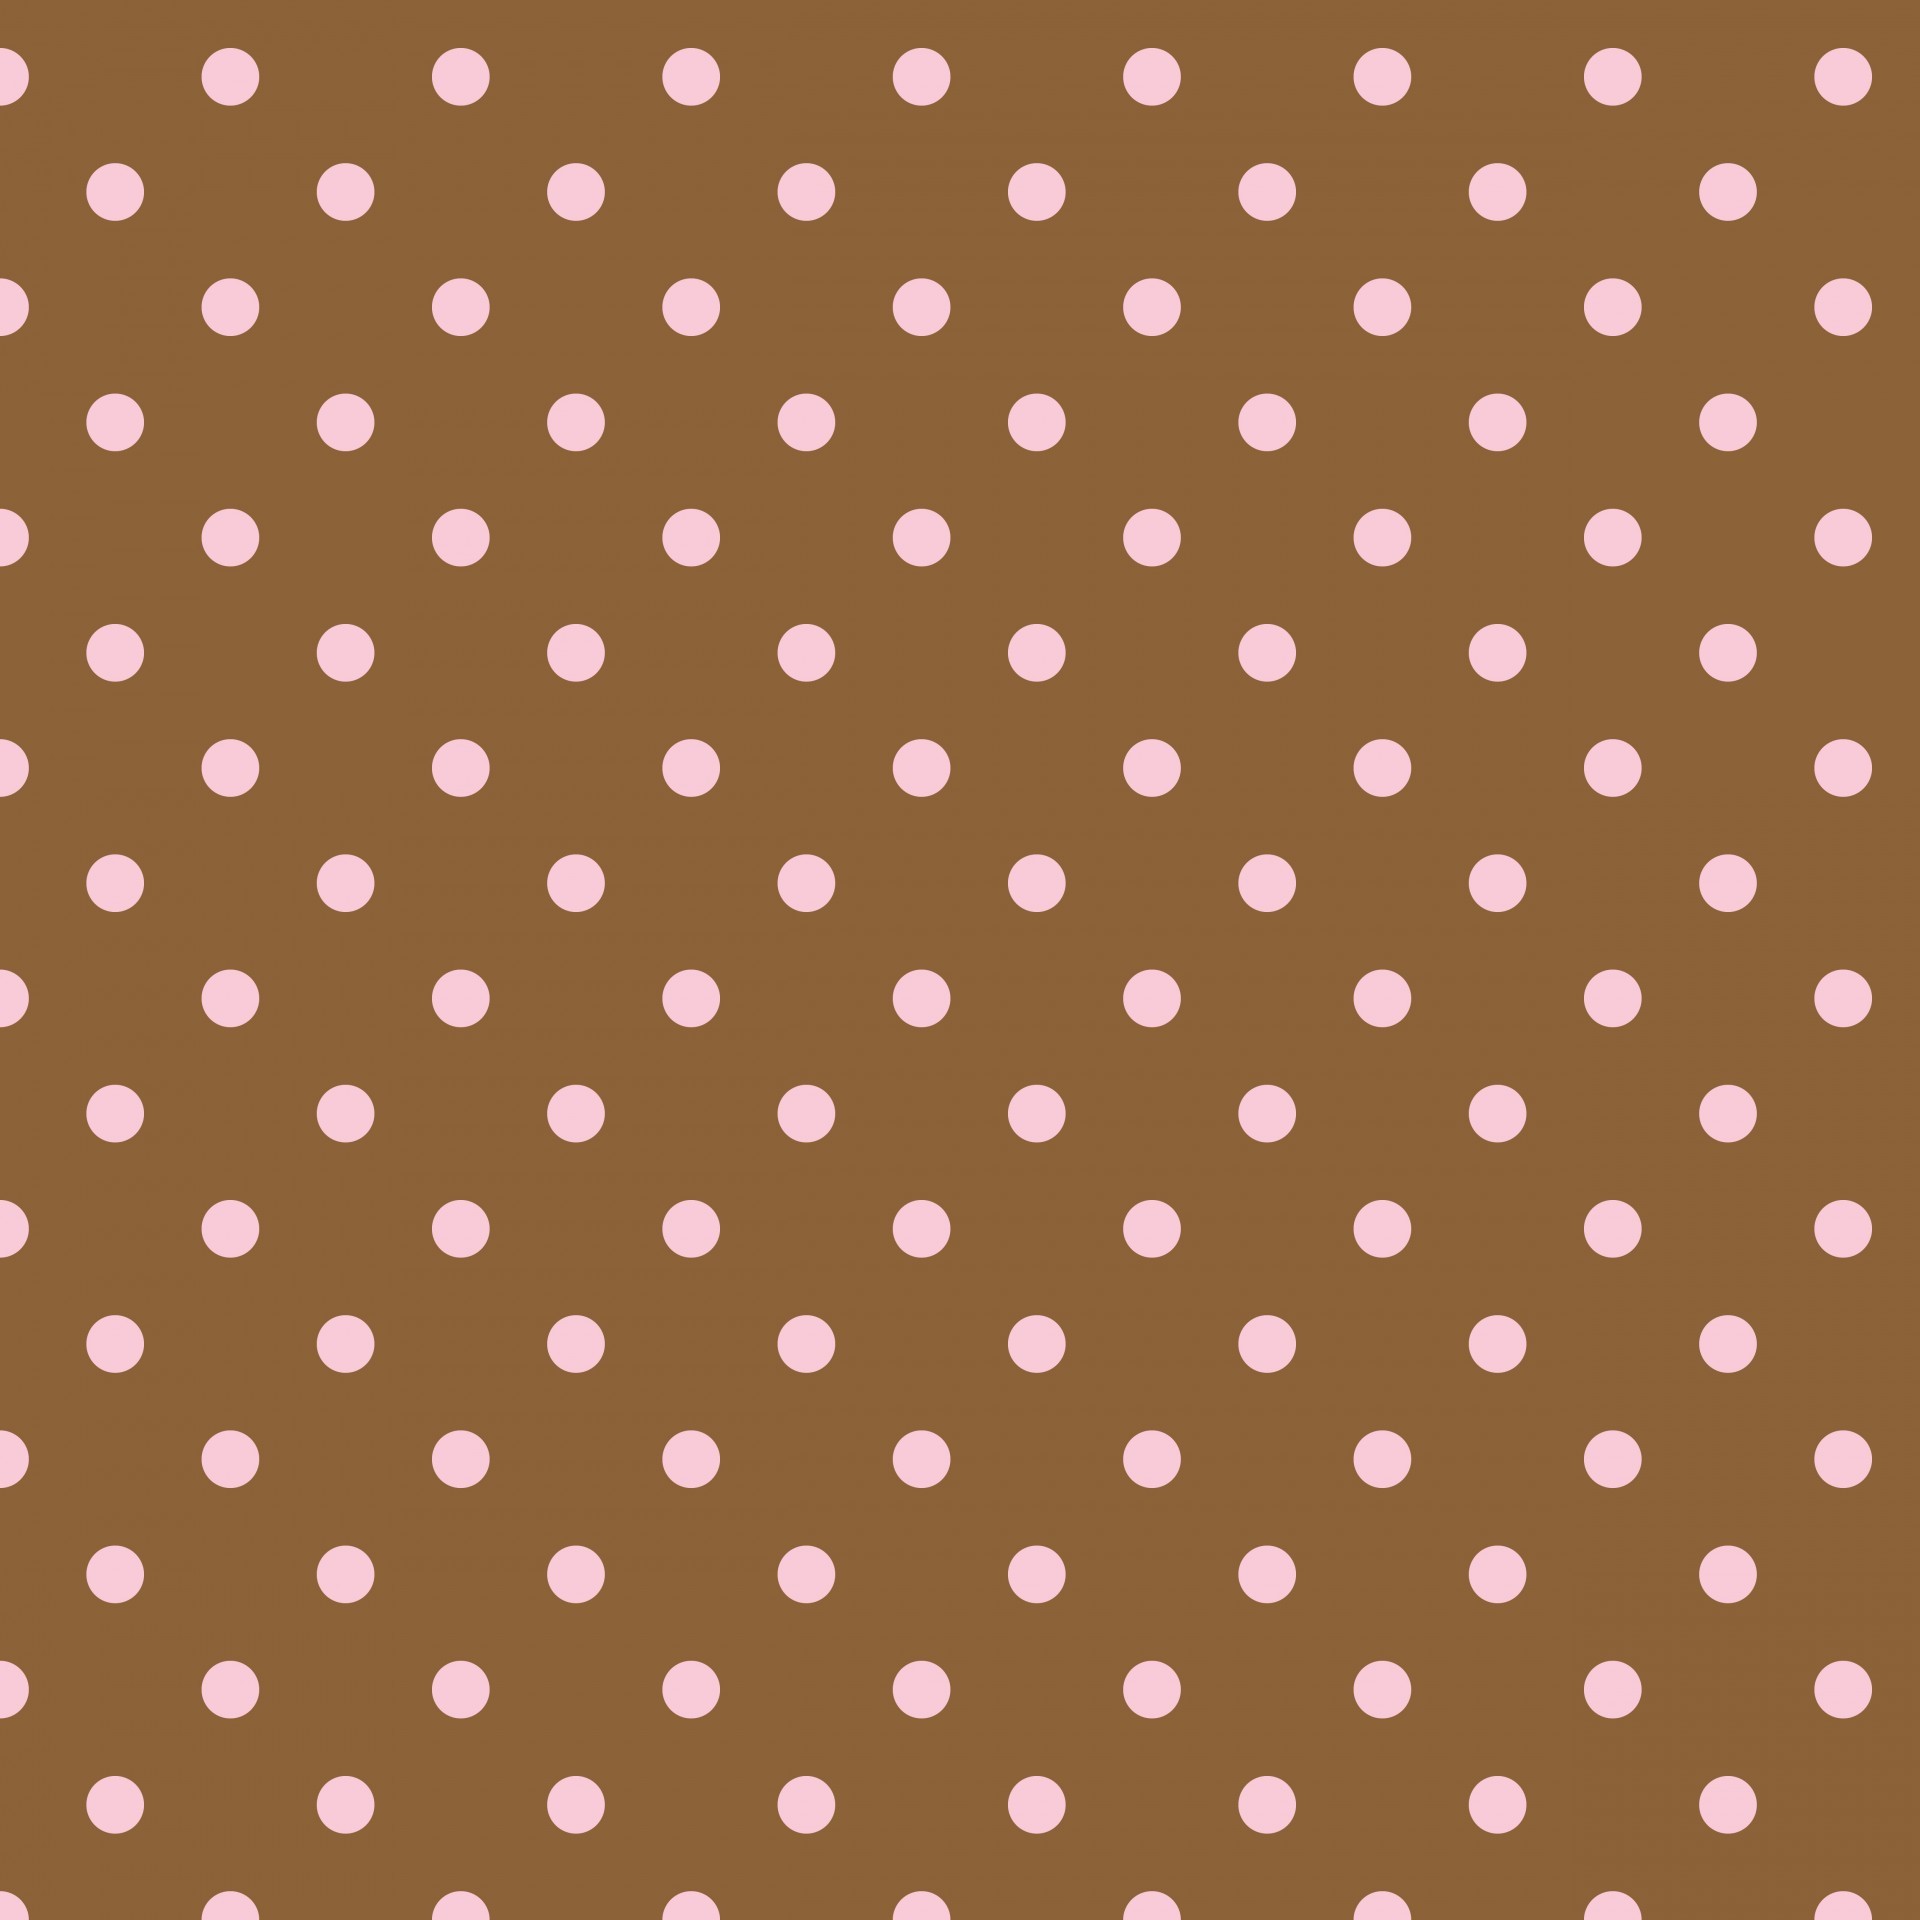 Polka dots in brown and pink wallpaper background